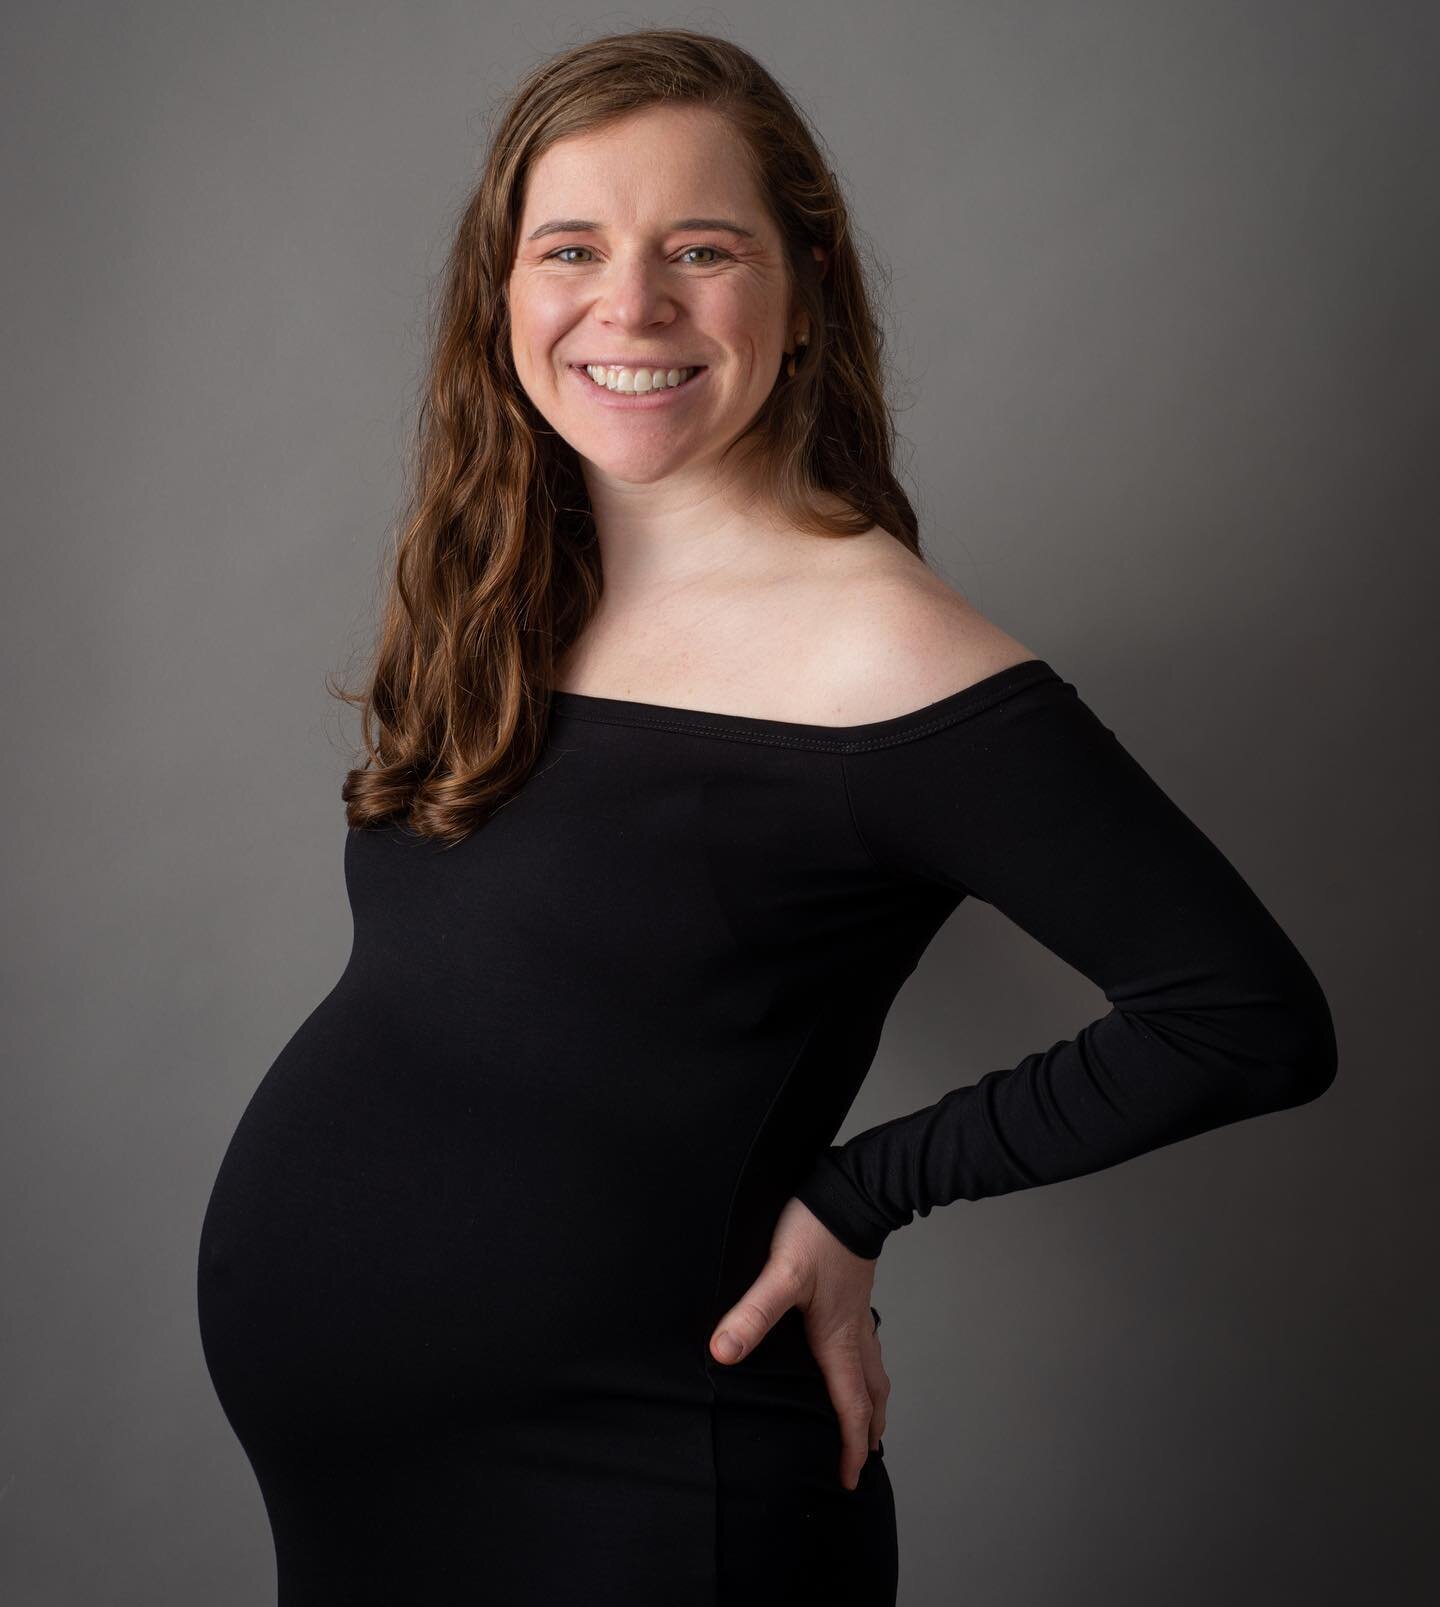 This gorgeous mama runs @themomconnection.co 

She visited the studio for her maternity portraits just in time before baby arrived less than a week later!

Creative Harbor studio owner, @katiering, is best known for her food and product photography b